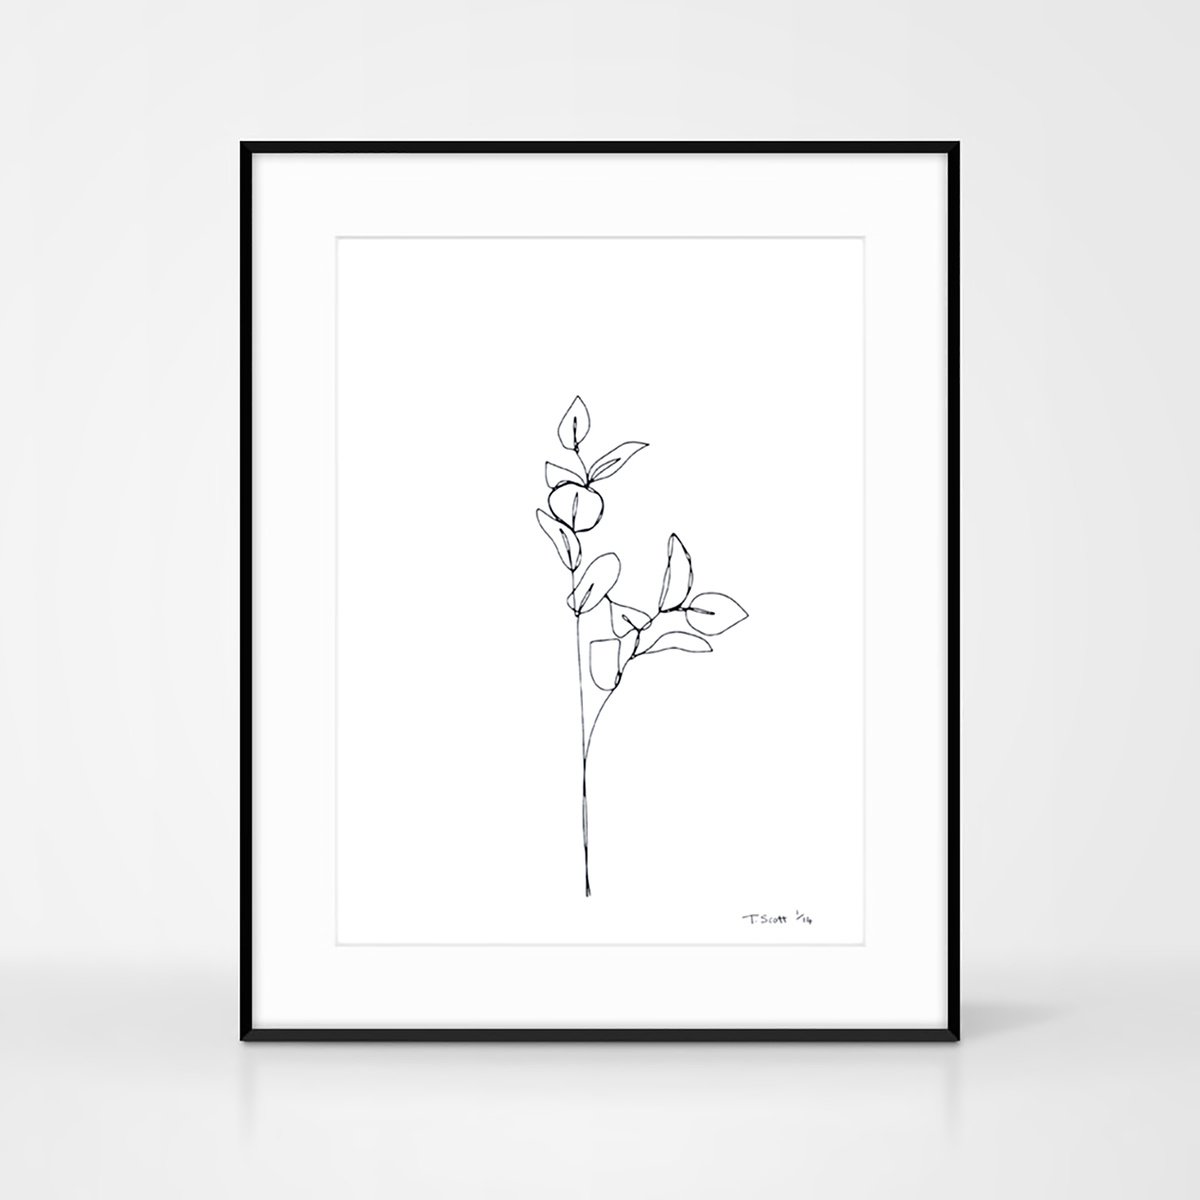 Screen print - Edition of 14 - Botanical plant illustration by The Colour Study